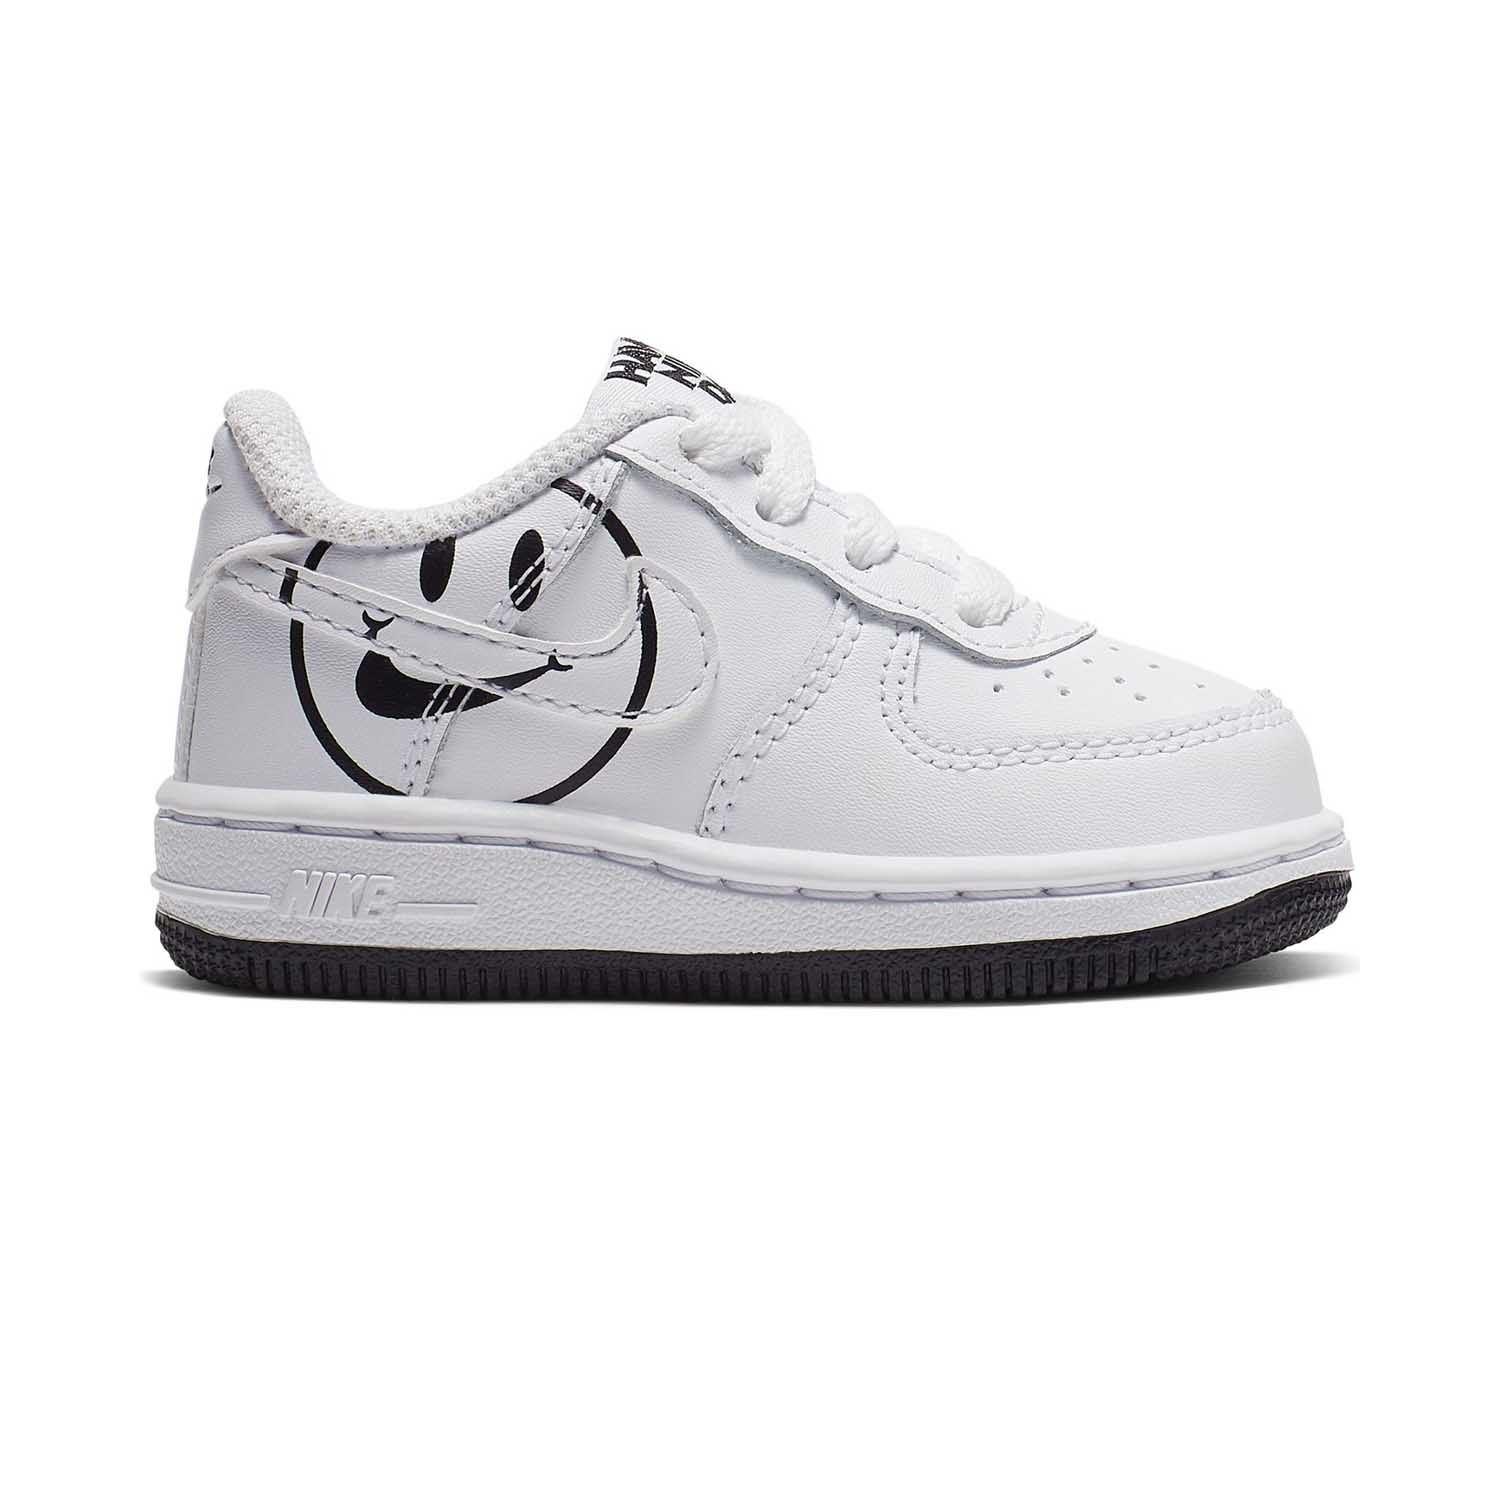 Nike Air Force 1 ‘Have A Nice Day’ LV8 2 I ( BQ8275-100 )